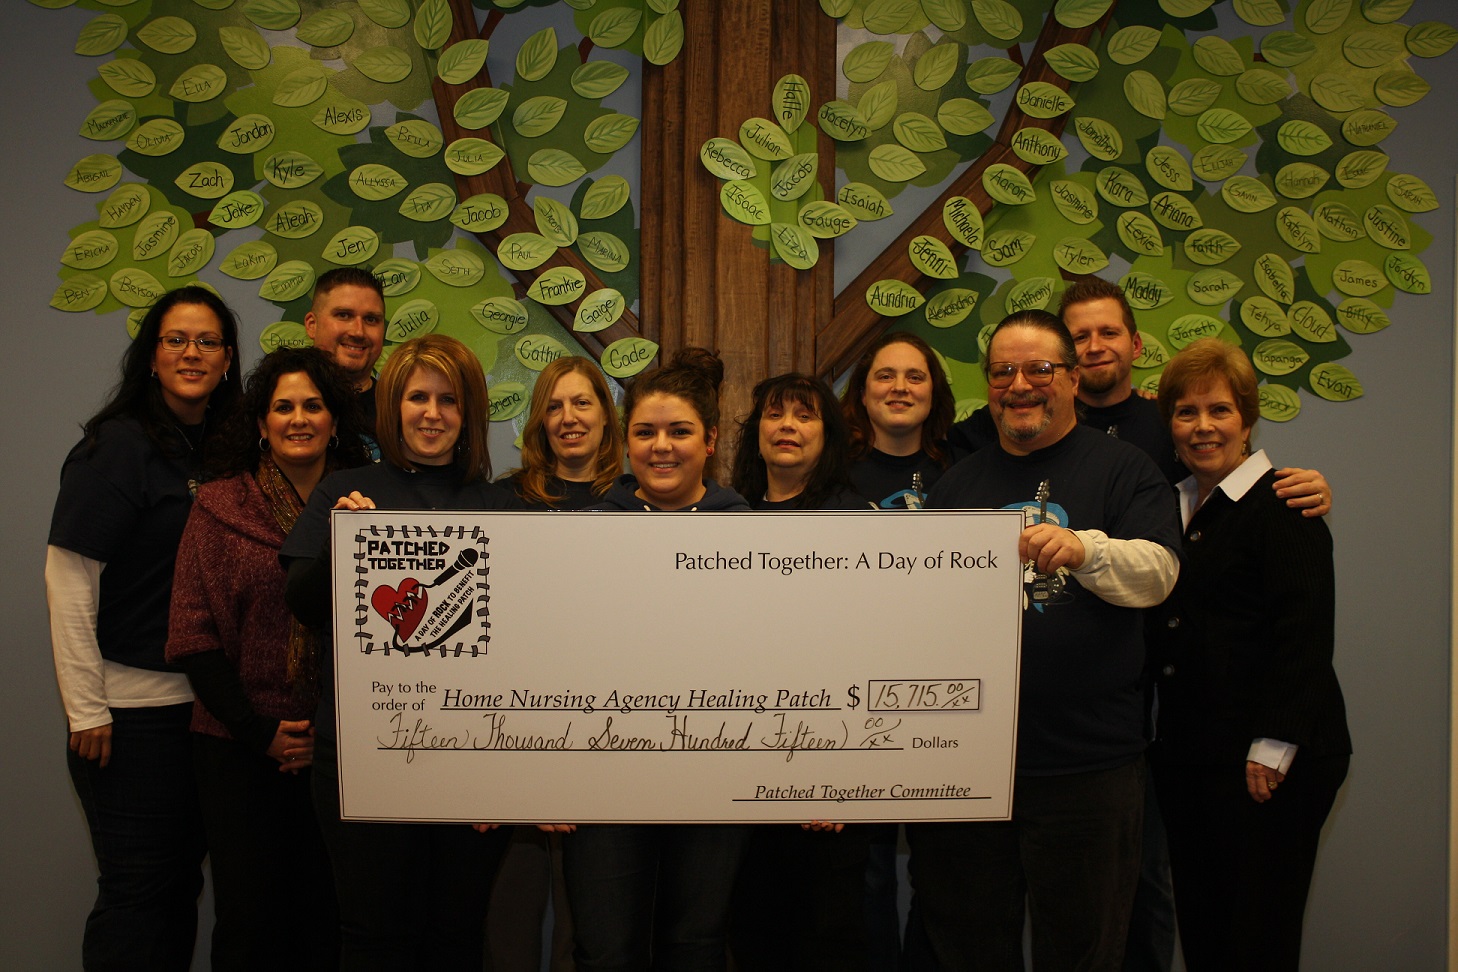 Patched Together 2013 raises nearly $16,000 for Home Nursing Agency's Healing Patch for grieving children.